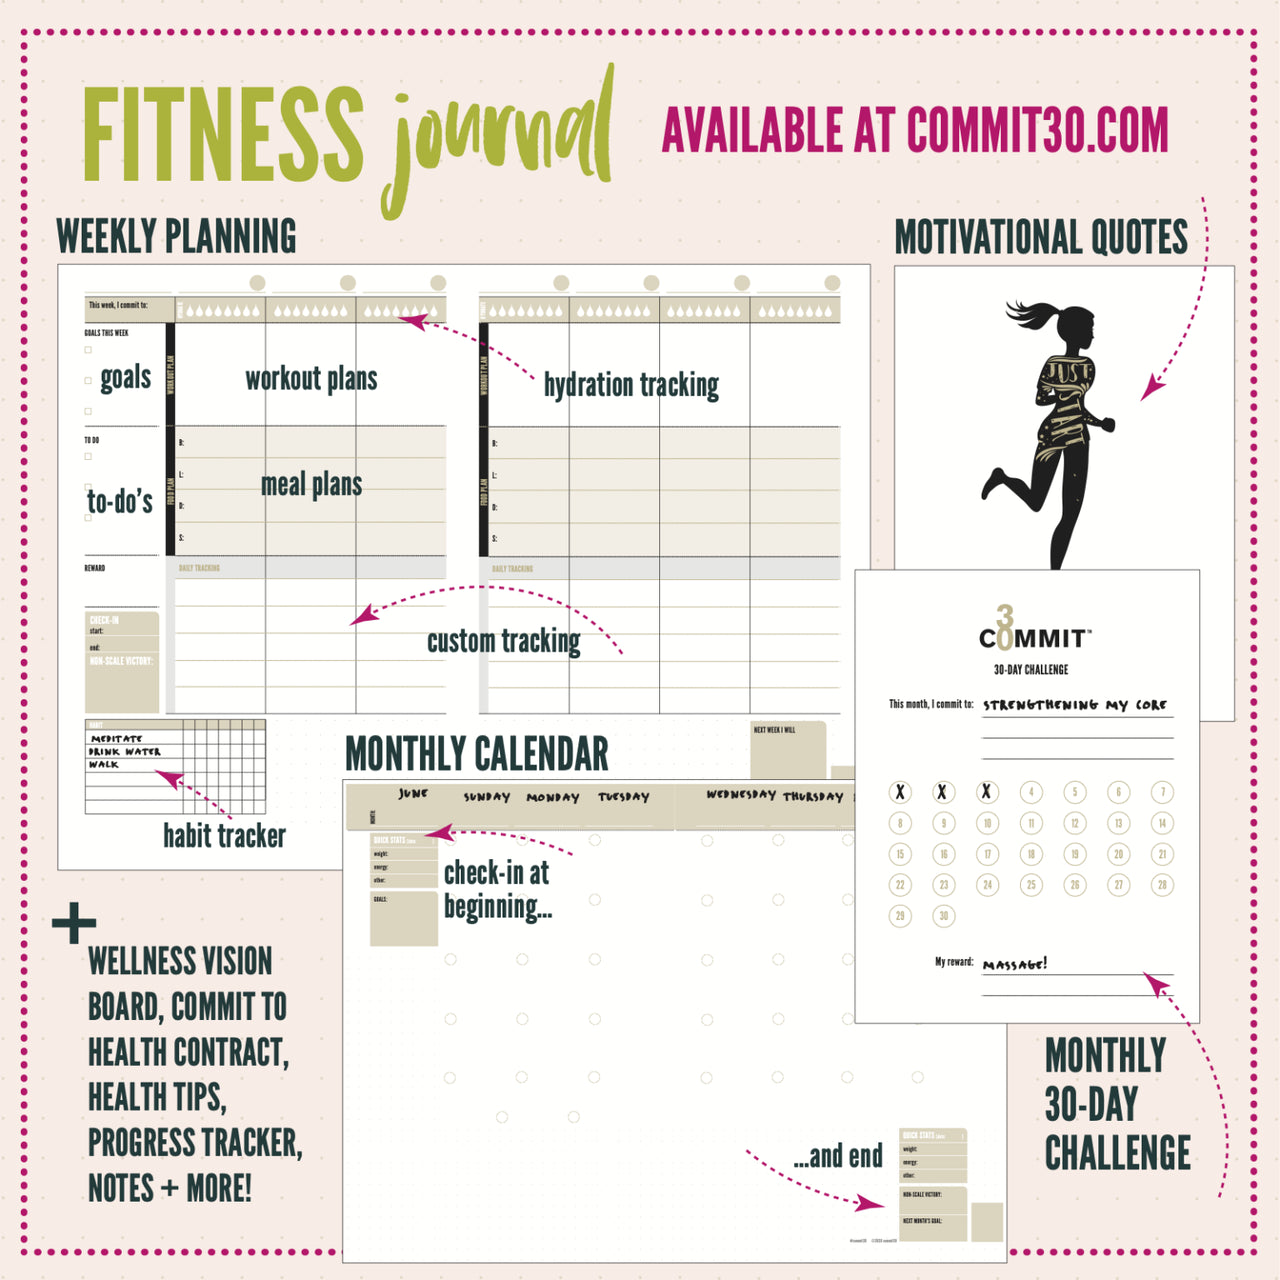 Health & Fitness Journal Features